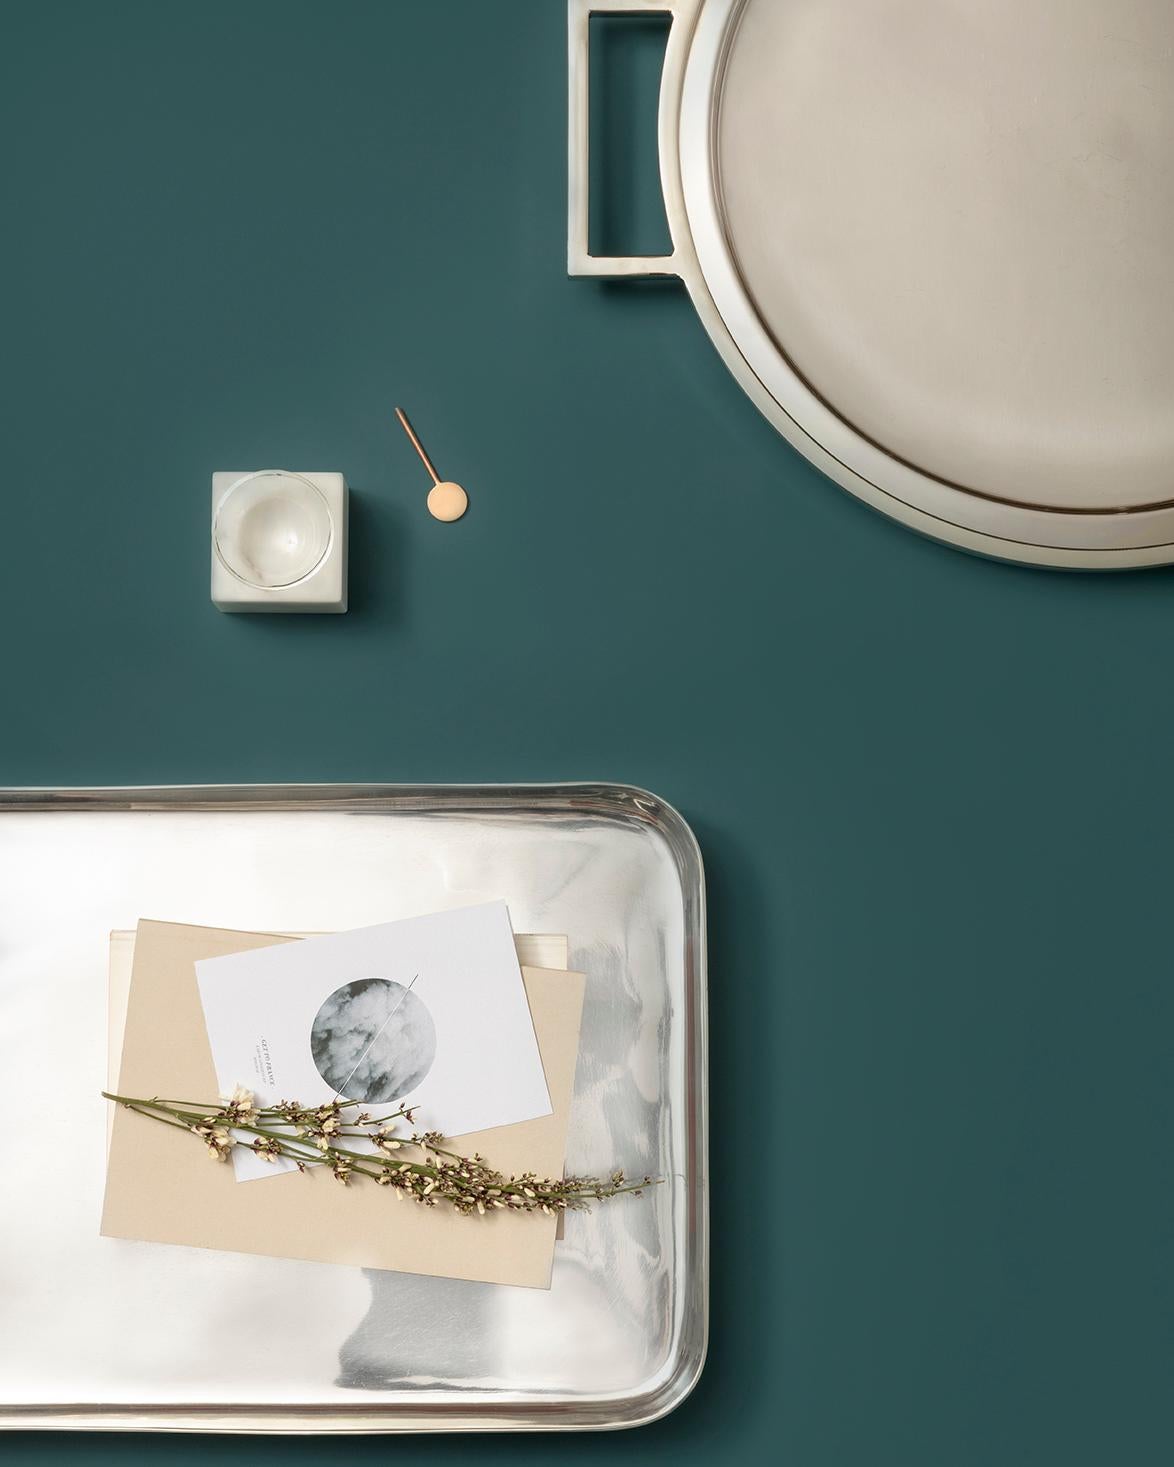 Half Moon is a small salt cellar composed by a base in Carrara marble and a small blown glass bowl. Half Moon is part of Lunar Landscape designed by Elisa Ossino, who conceived for Paola C. a tableware collection, revisiting the Classic themes of